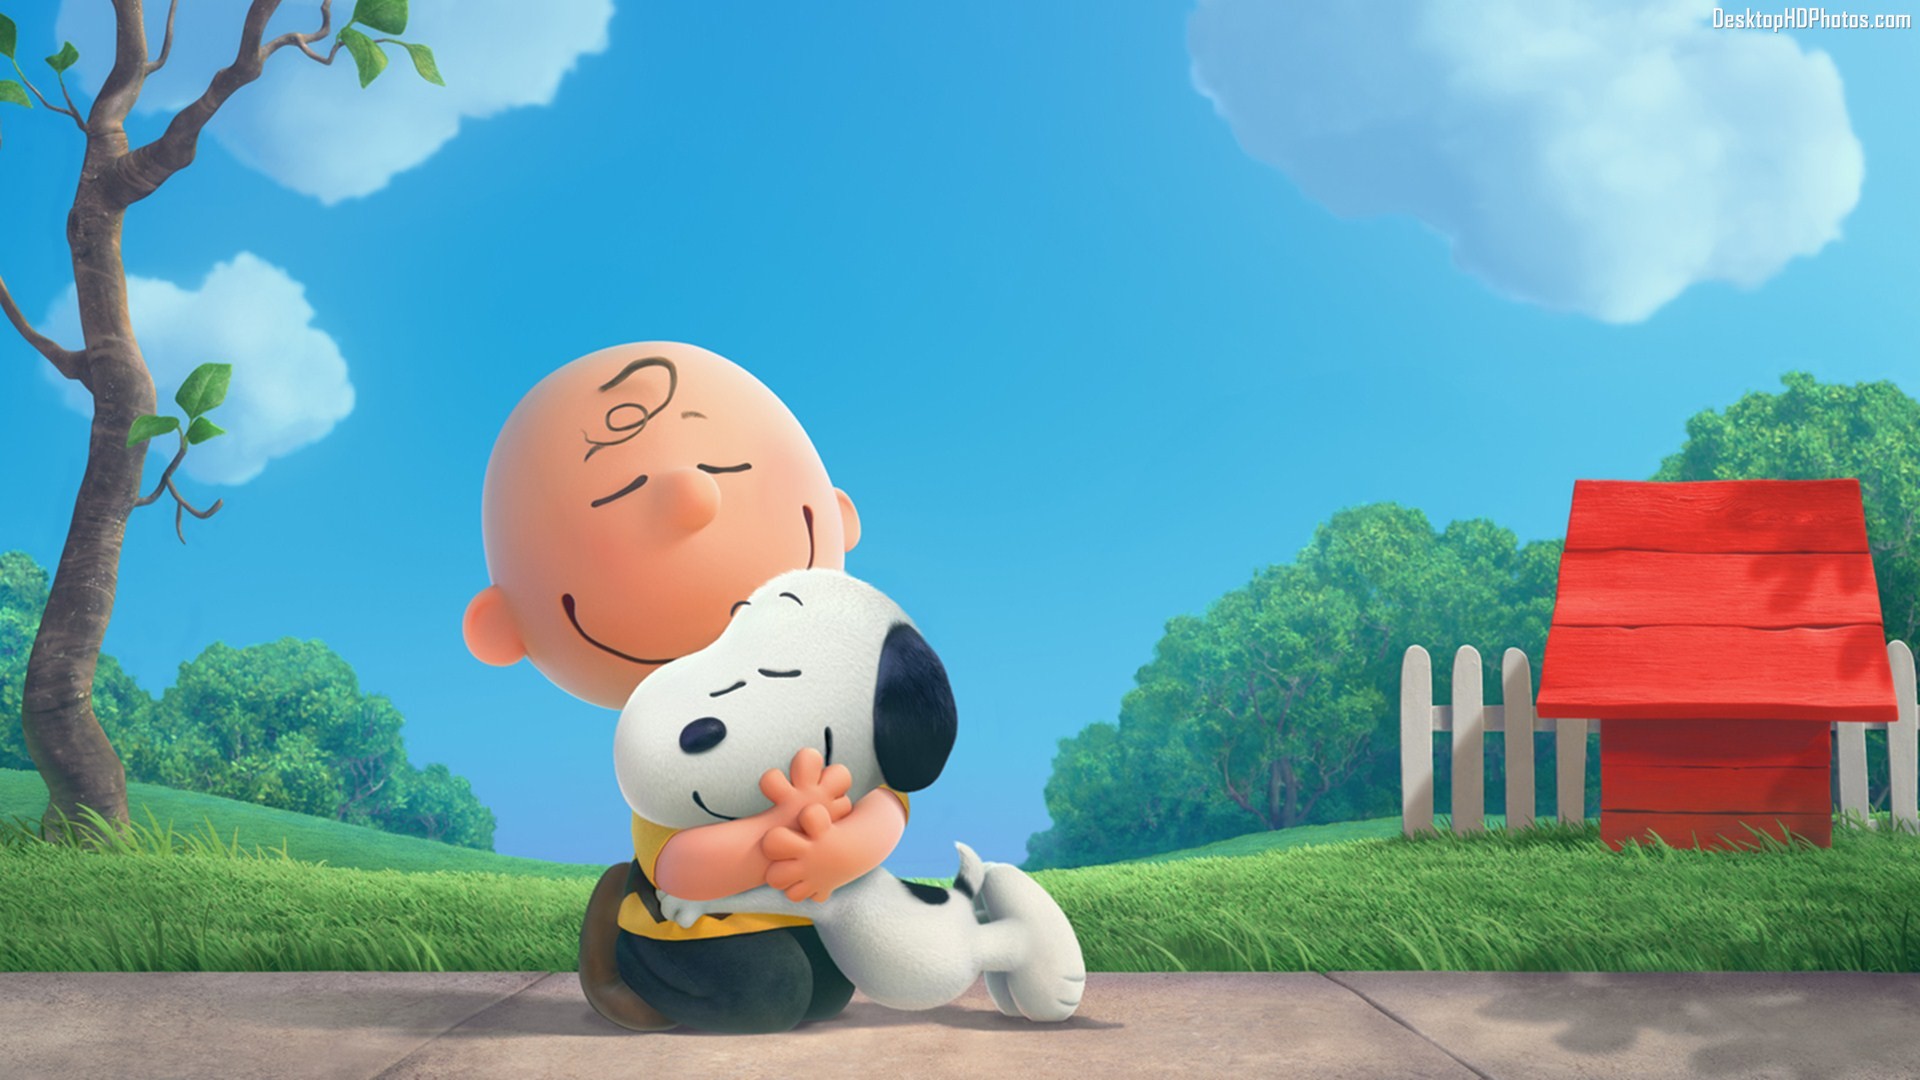 The Peanuts Movie Wallpapers High Resolution and Quality Download